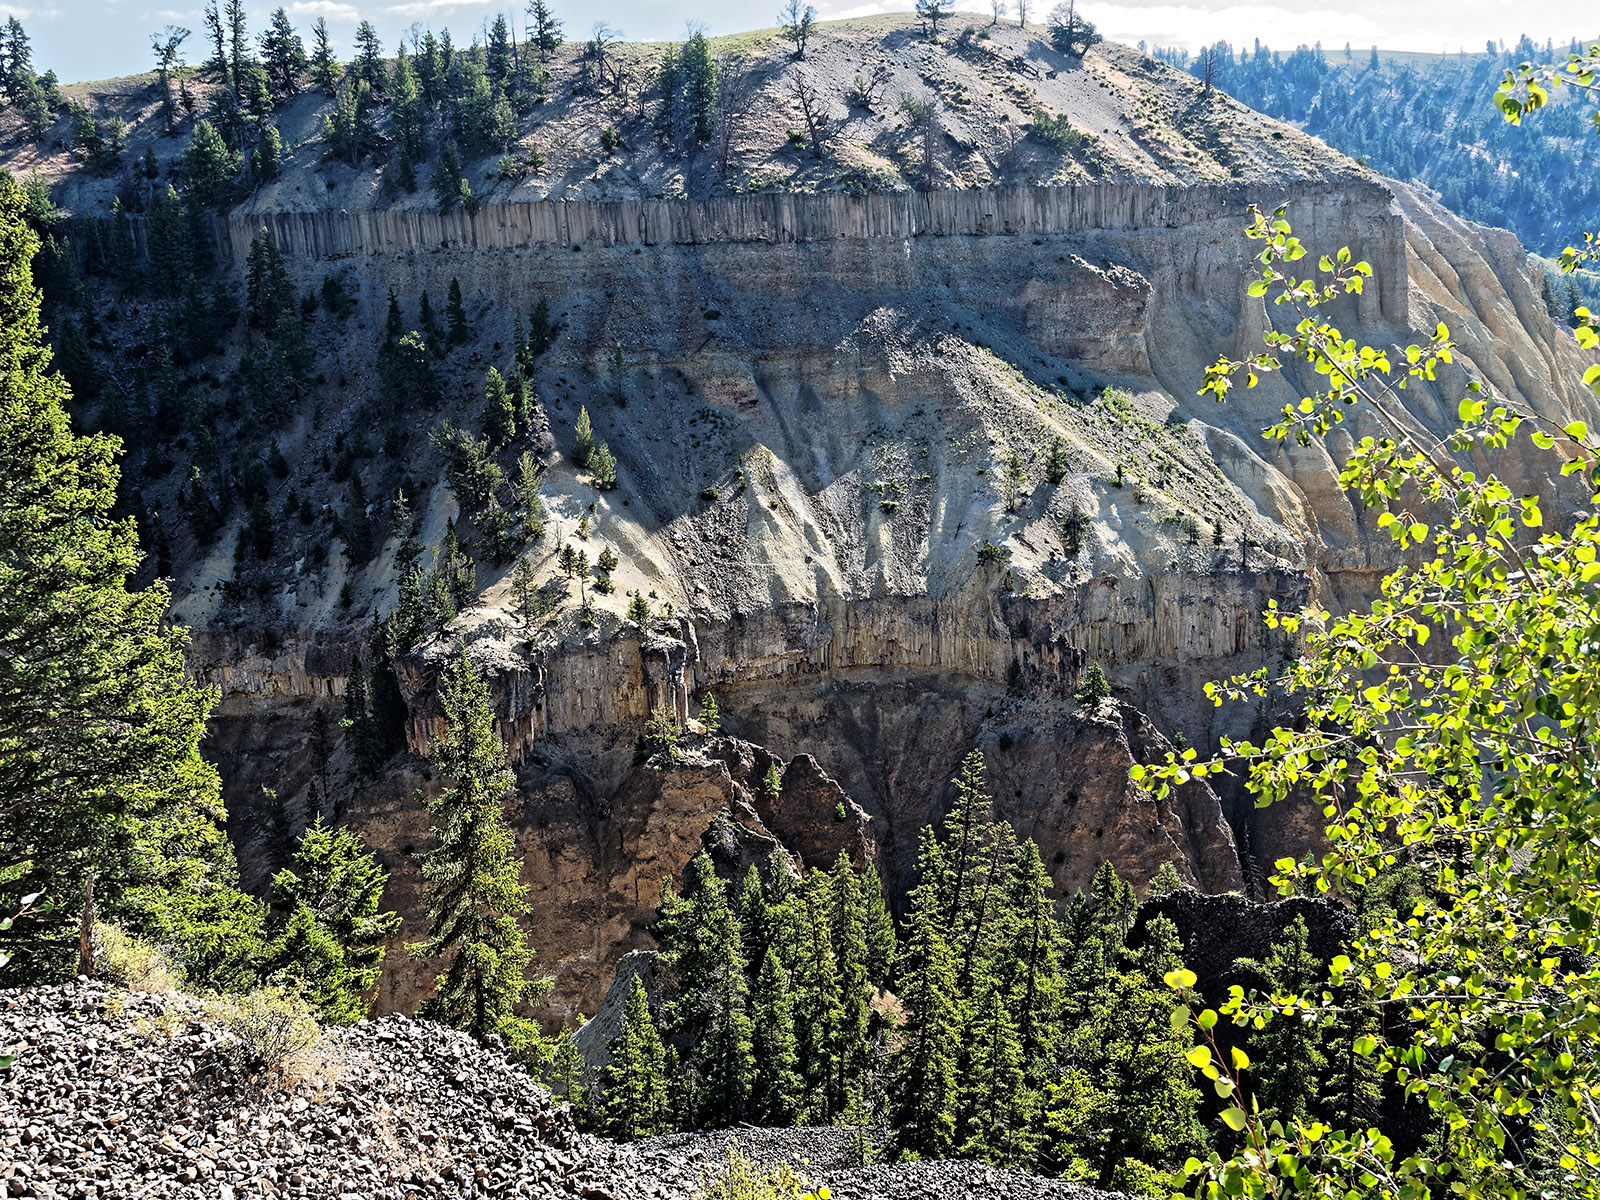 The eroded edge of Yellowstone River Canyon exposes strata from volcanic activity in the Yellowstone area that occurred in three phases from 48 million to 0.6 million years ago. The strata  from top to bottom that capture1.3 million years activity are:  glacial till (top); columnar jointed basalt; gravel of volcanic rock; 2nd layer of columnar jointed basalt; gravel; and Eocene conglomerate.